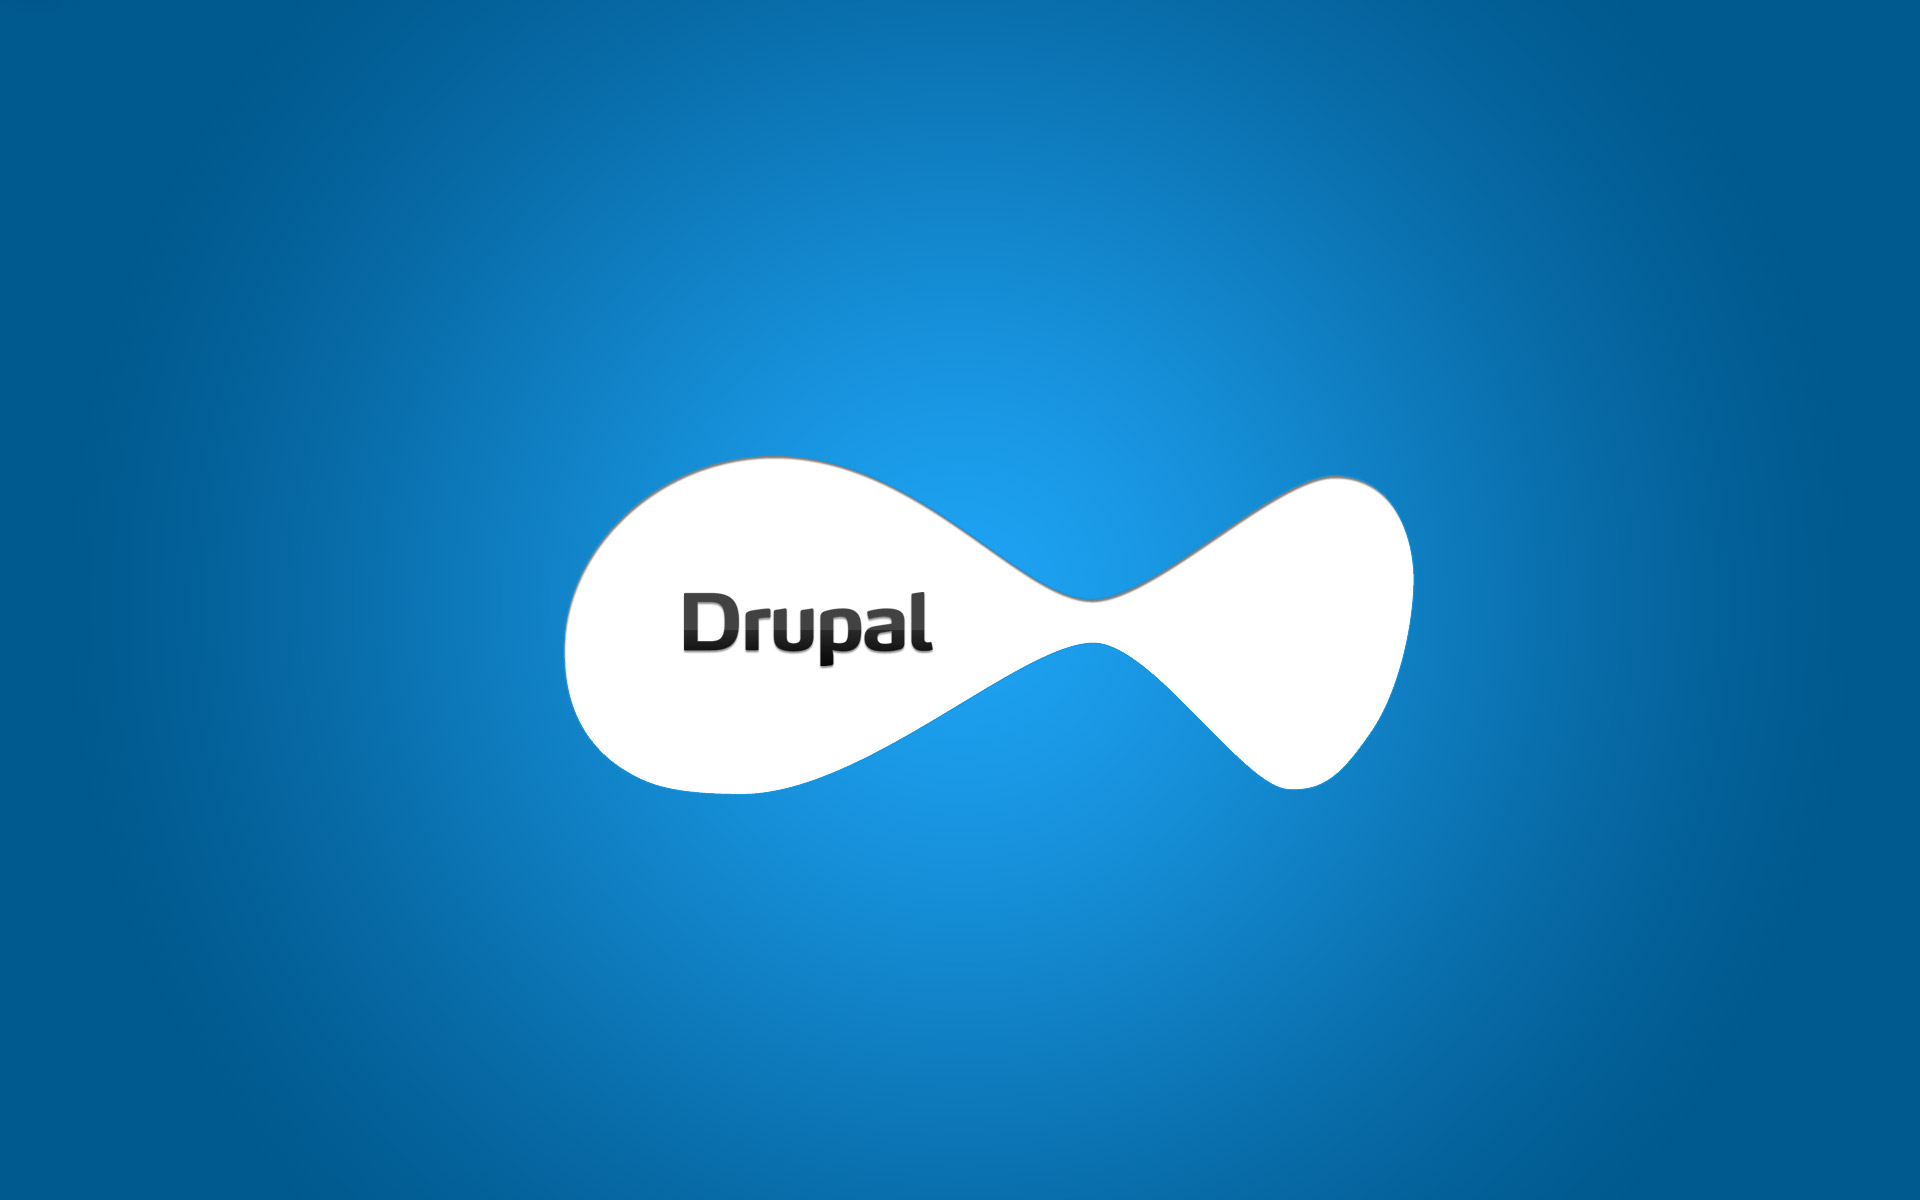 Why Drupal For Your Next Website Project?